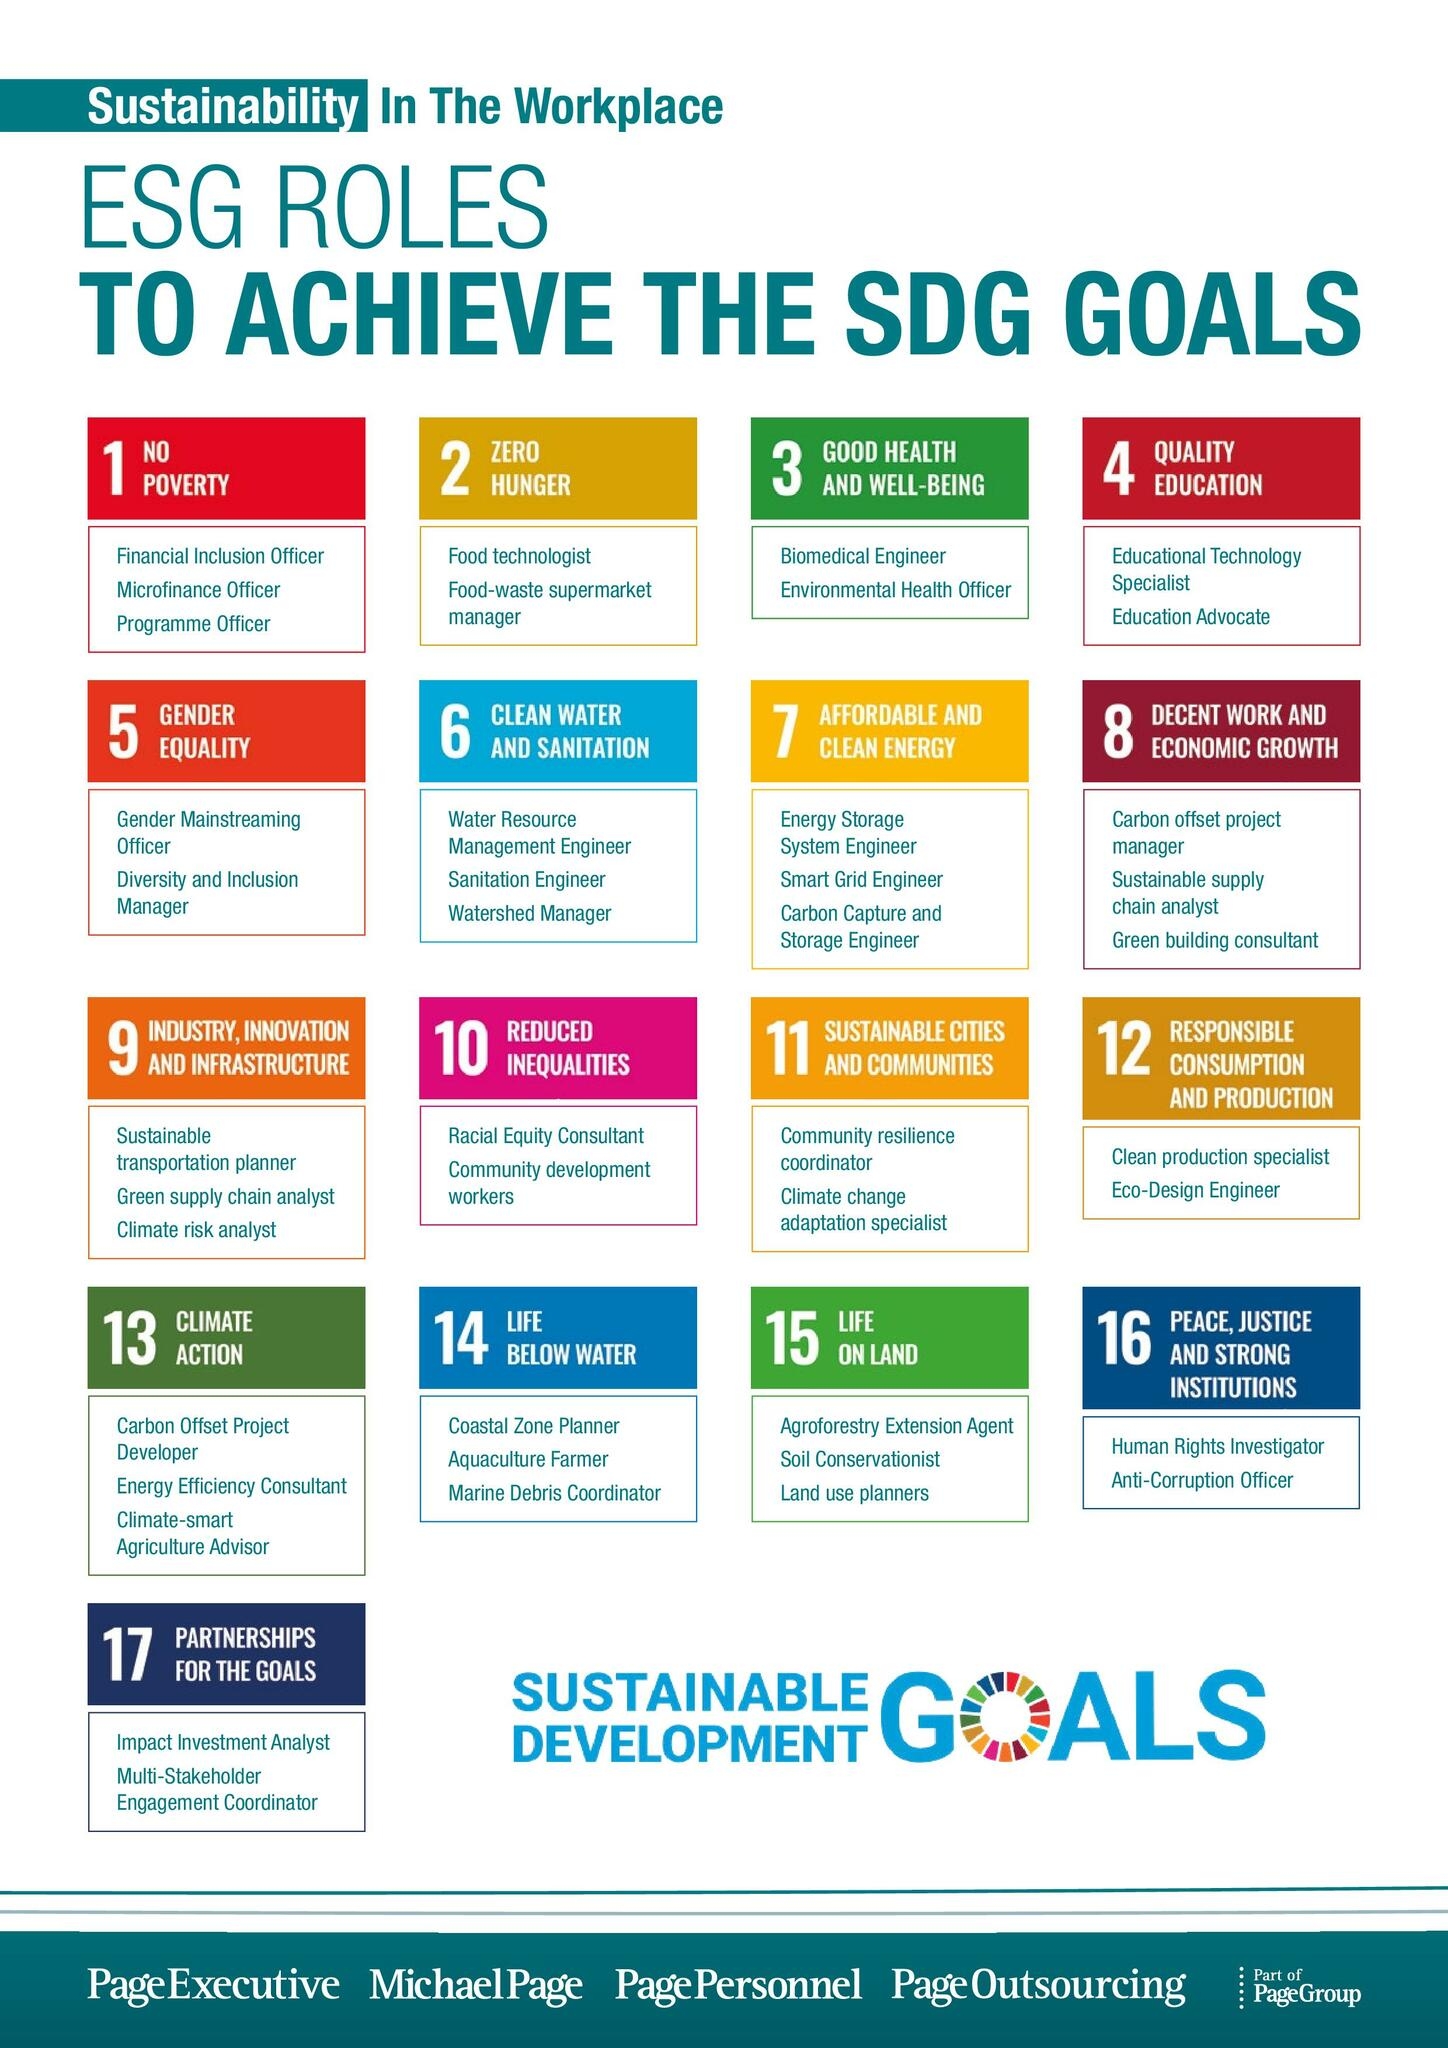 List of ESG roles to help achieve the SDG goals in 2023